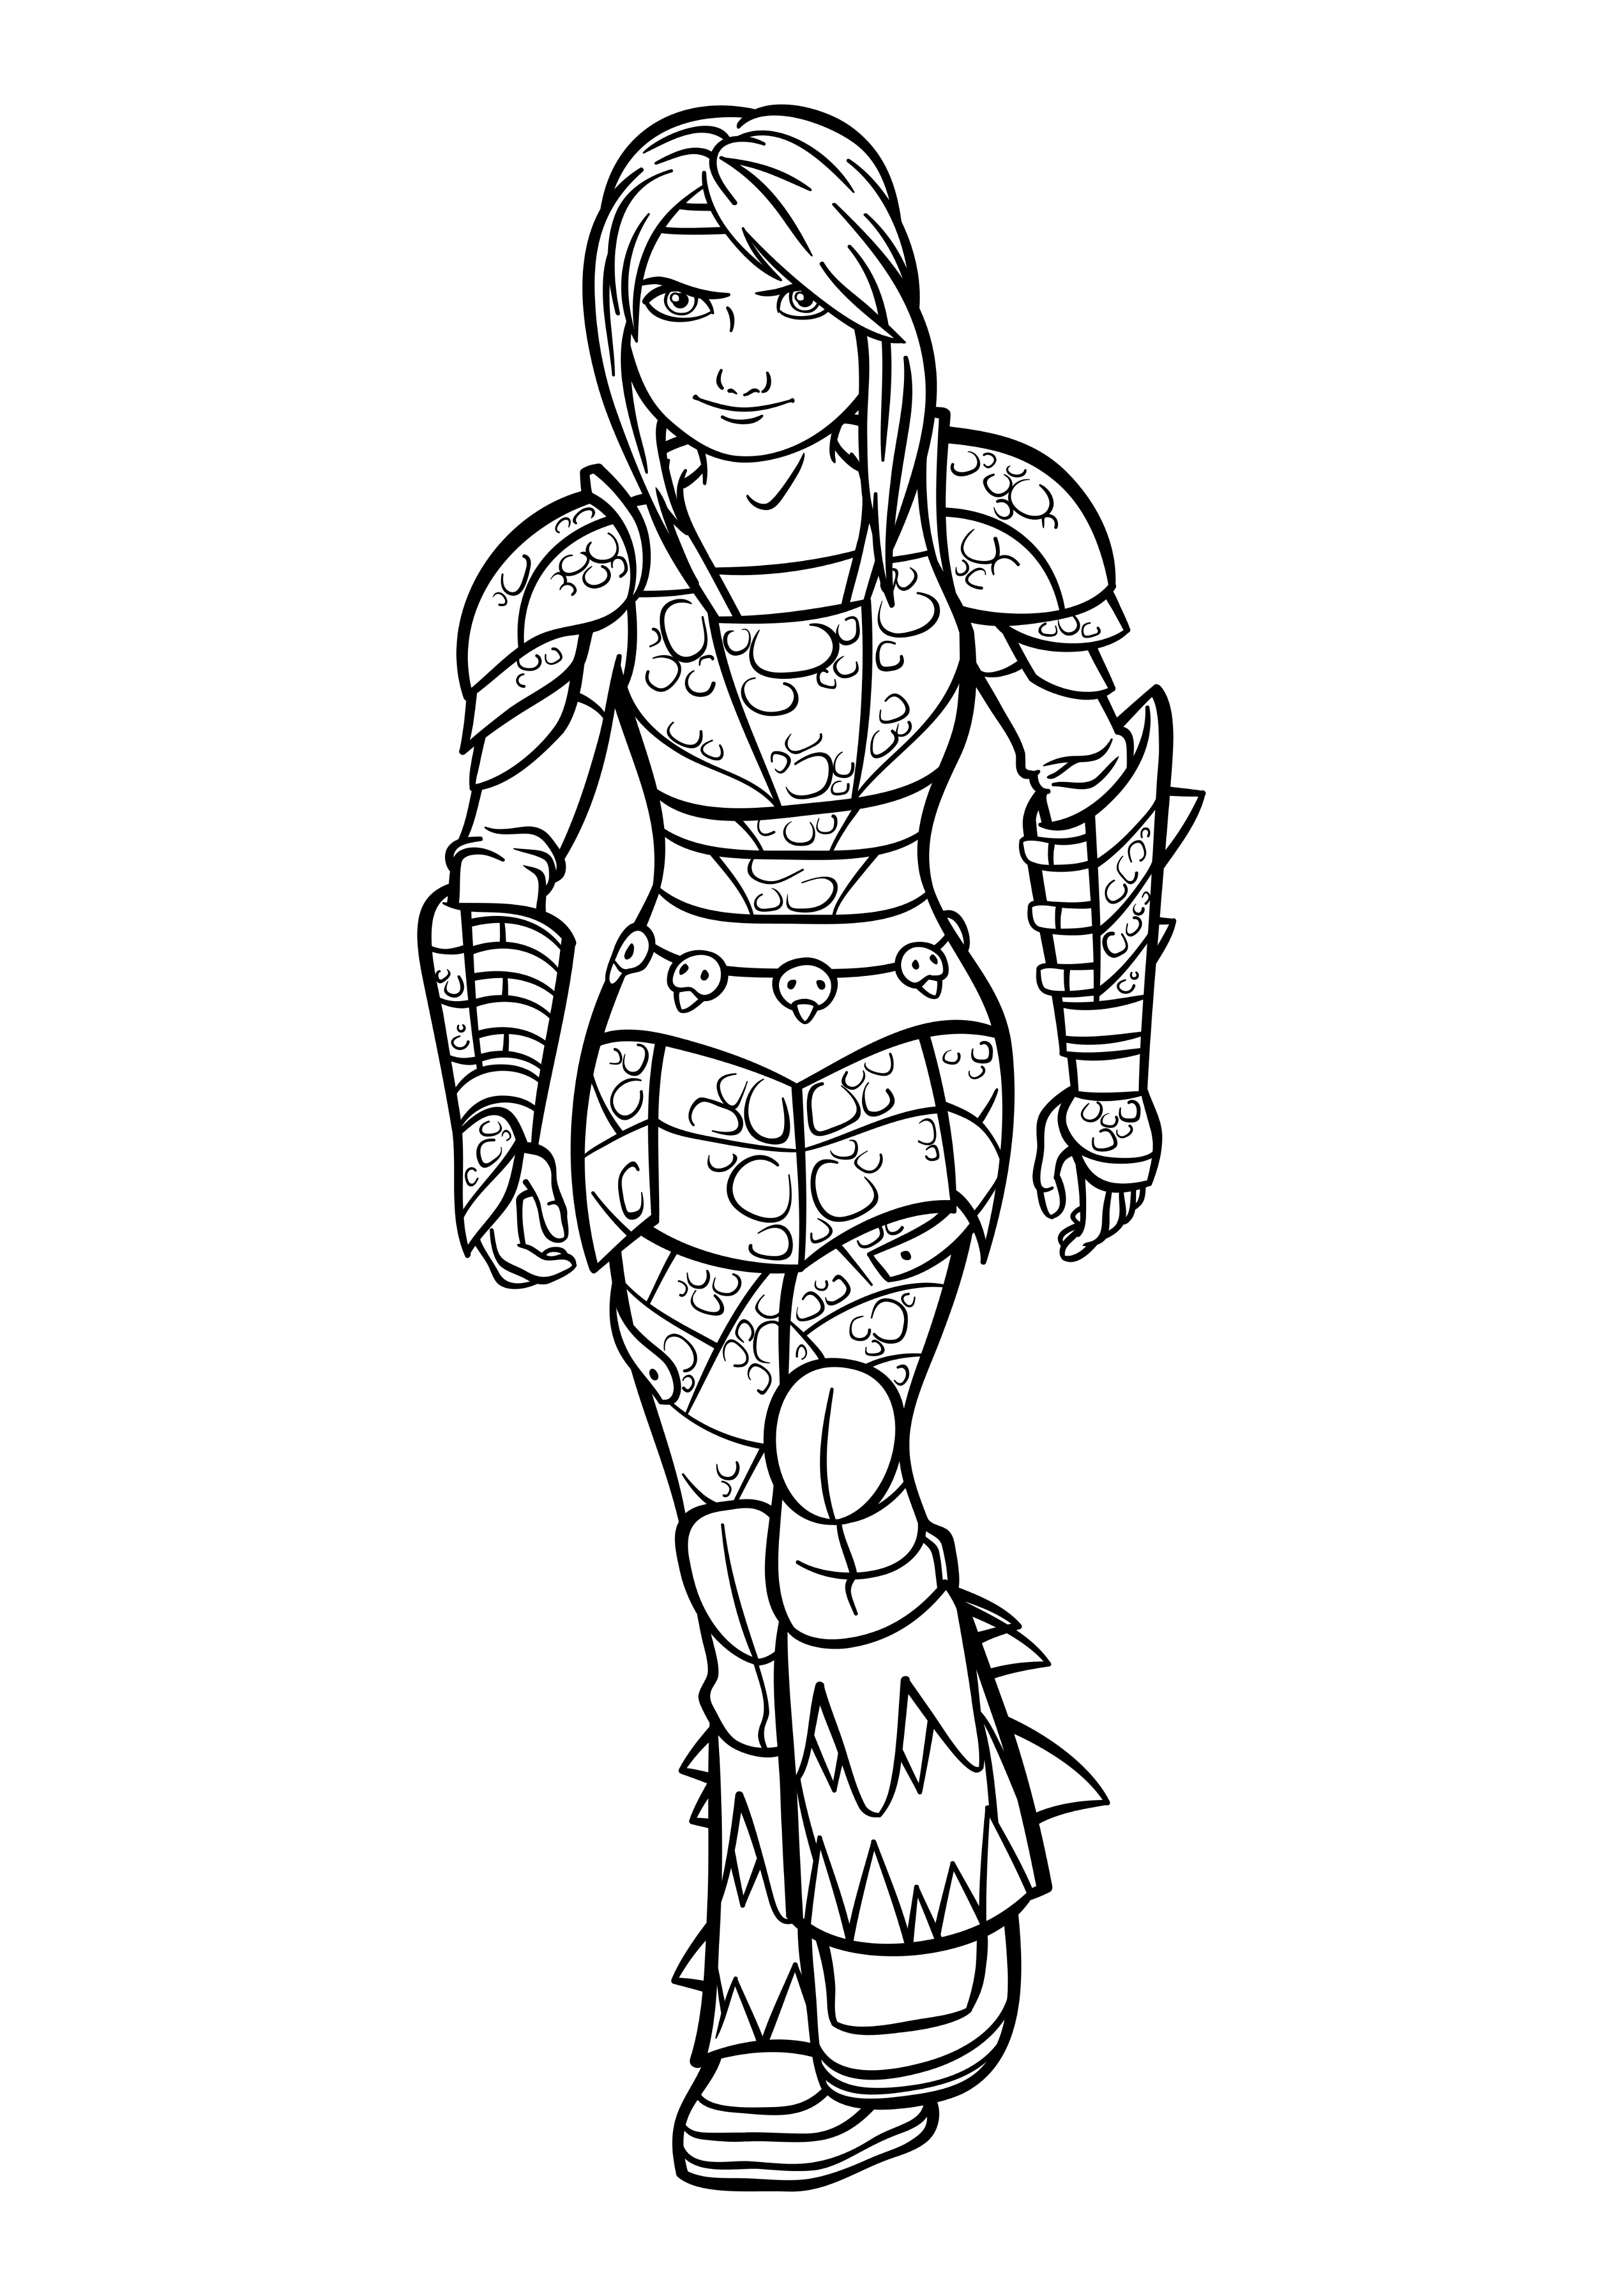 Coloring page How to Train Your Dragon 3 Astrid Hofferson